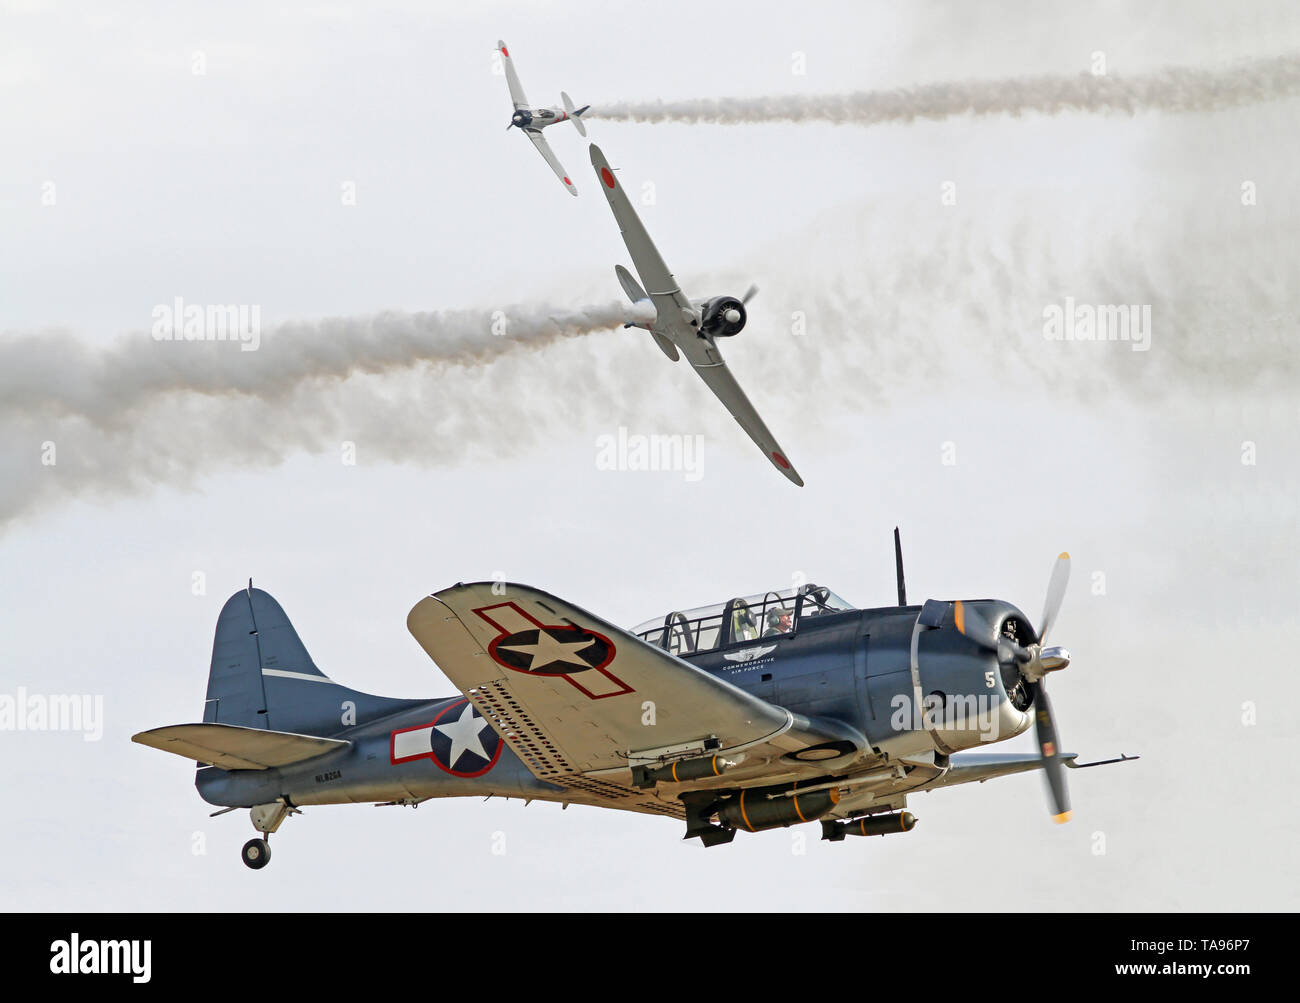 Two Japanese Zero fighters pursue a U.S. Douglas SBD Dauntless dive bomber in a recreation of the Battle of Midway during World War II. Stock Photo